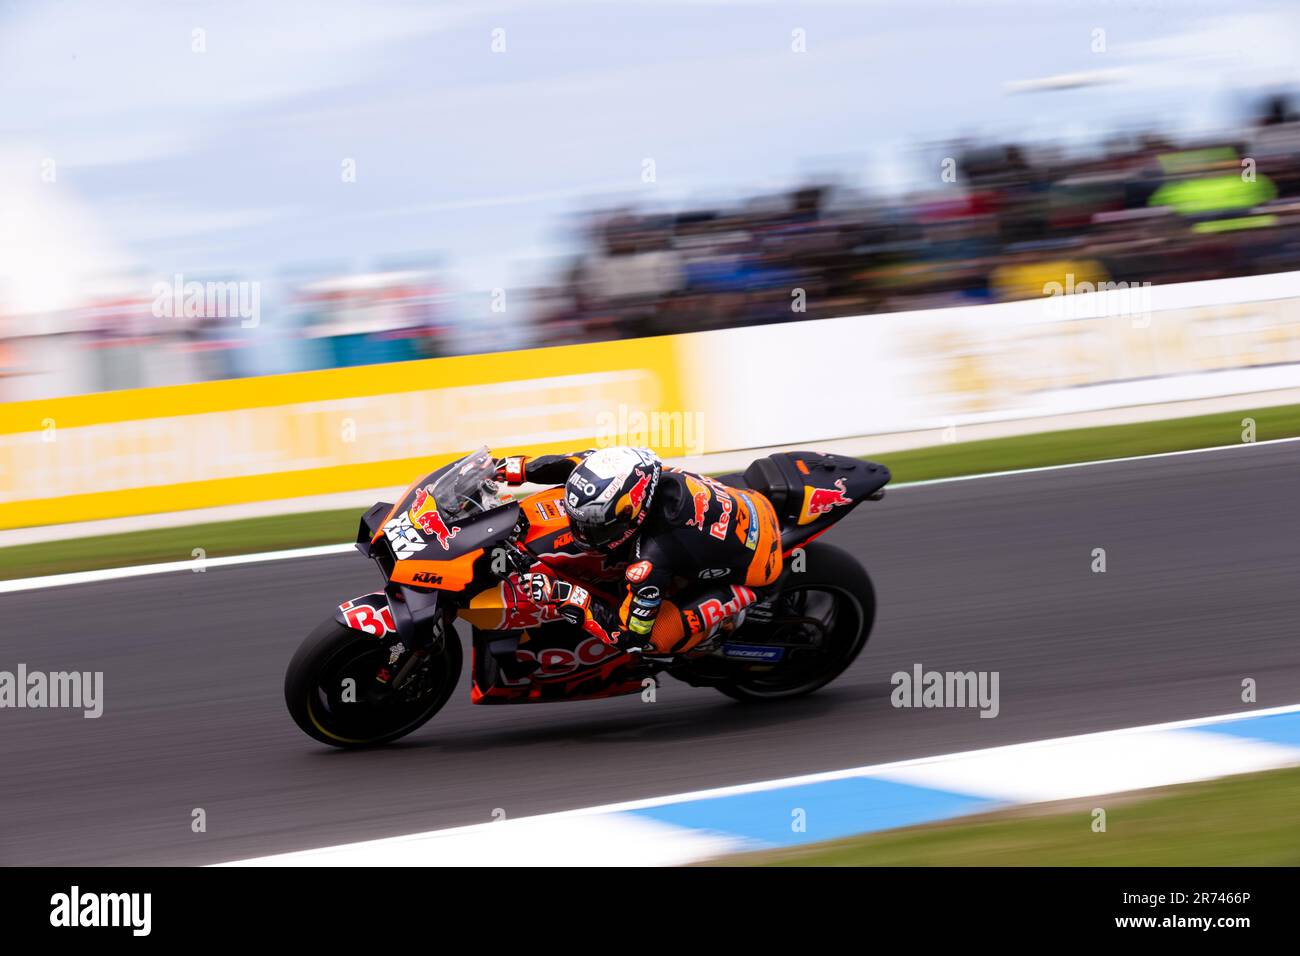 PHILLIP ISLAND, AUSTRALIA - OCTOBER 15: Miguel Oliveira of Portugal on the Red Bull KTM Factory Racing KTM during MotoGP qualifying at The 2022 Australian MotoGP at The Phillip Island Circuit on October 15, 2022 in Phillip Island, Australia. Stock Photo